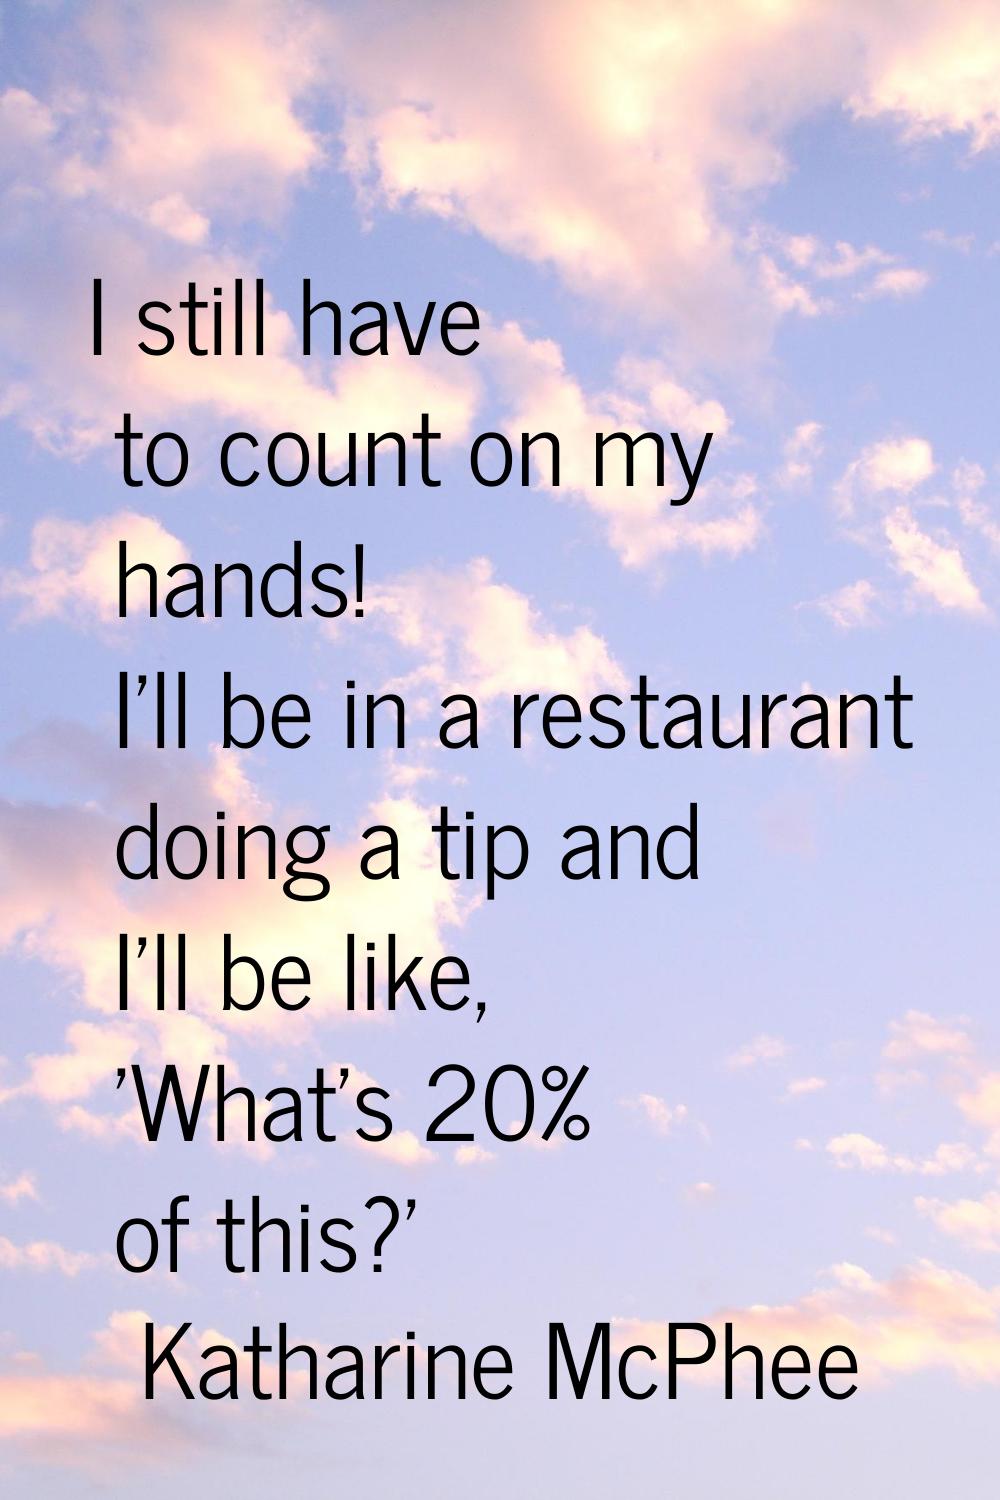 I still have to count on my hands! I'll be in a restaurant doing a tip and I'll be like, 'What's 20